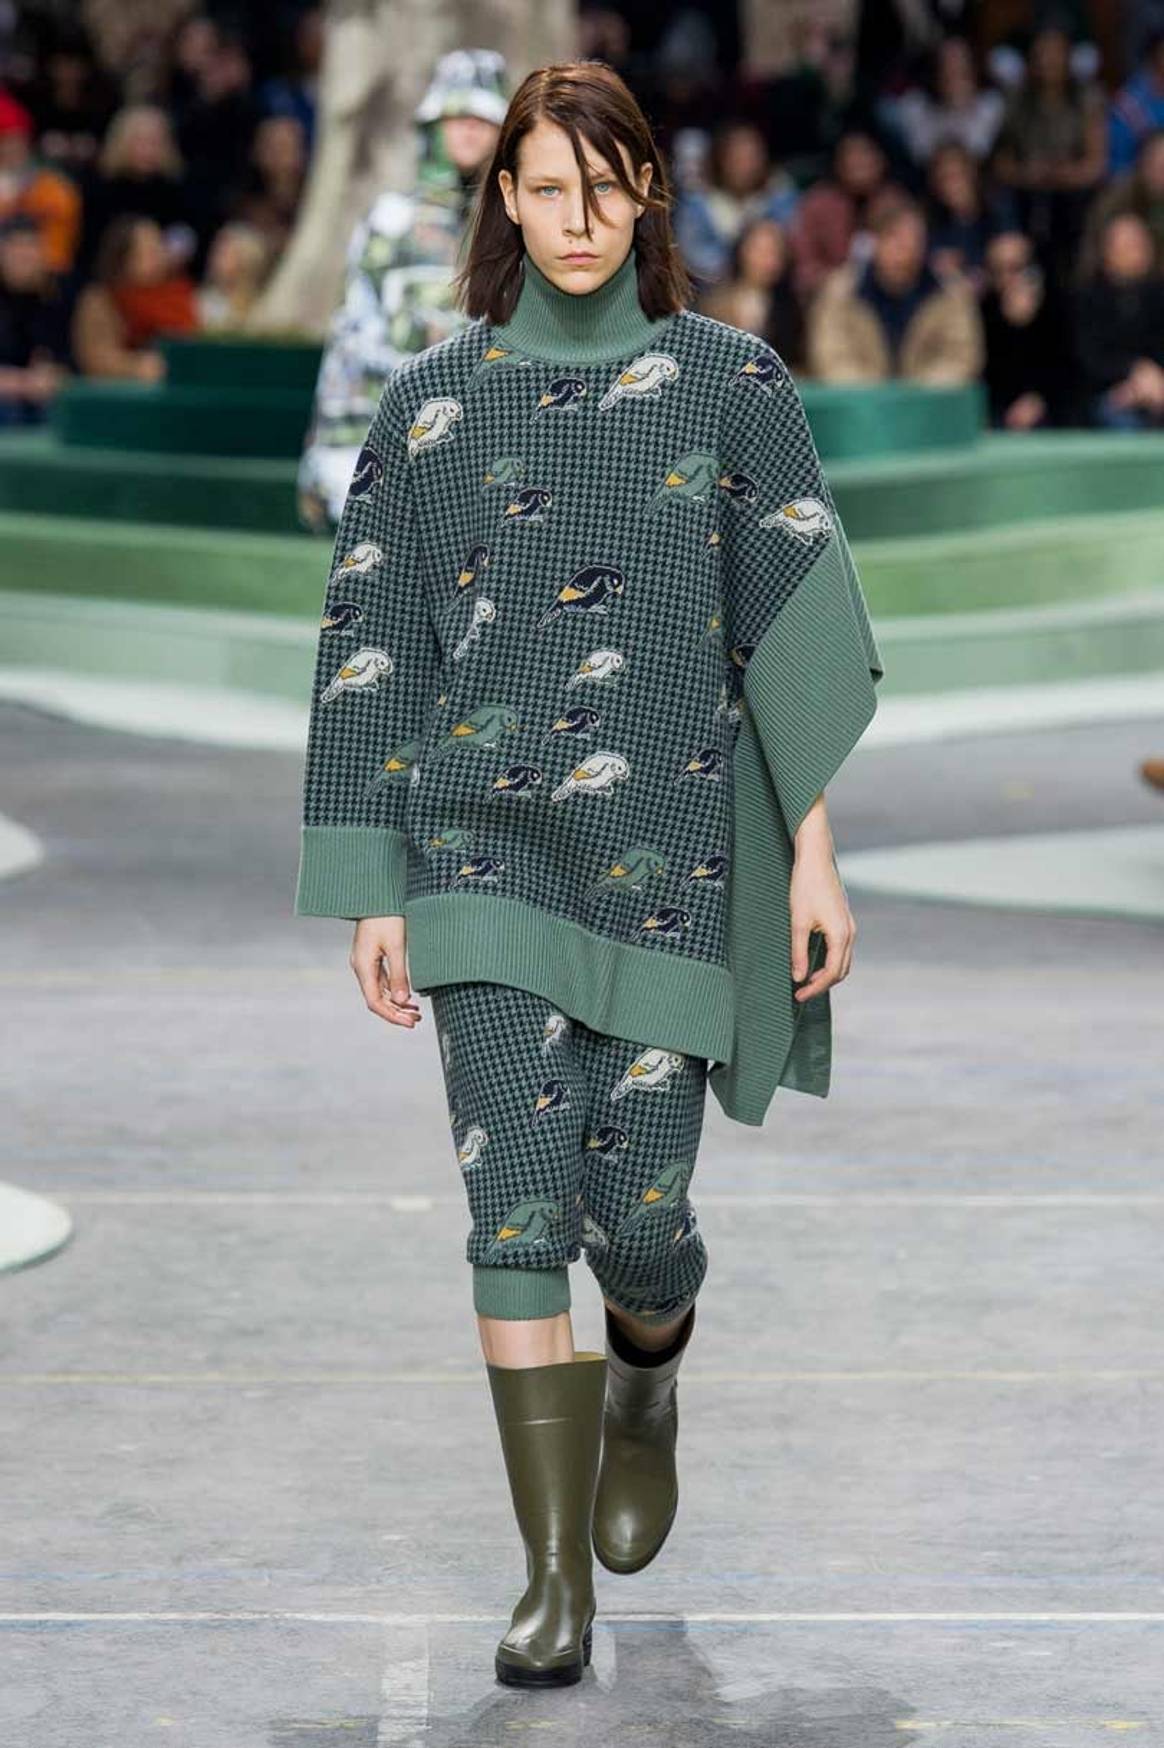 Lacoste swaps its crocodile for logos of endangered species during PFW